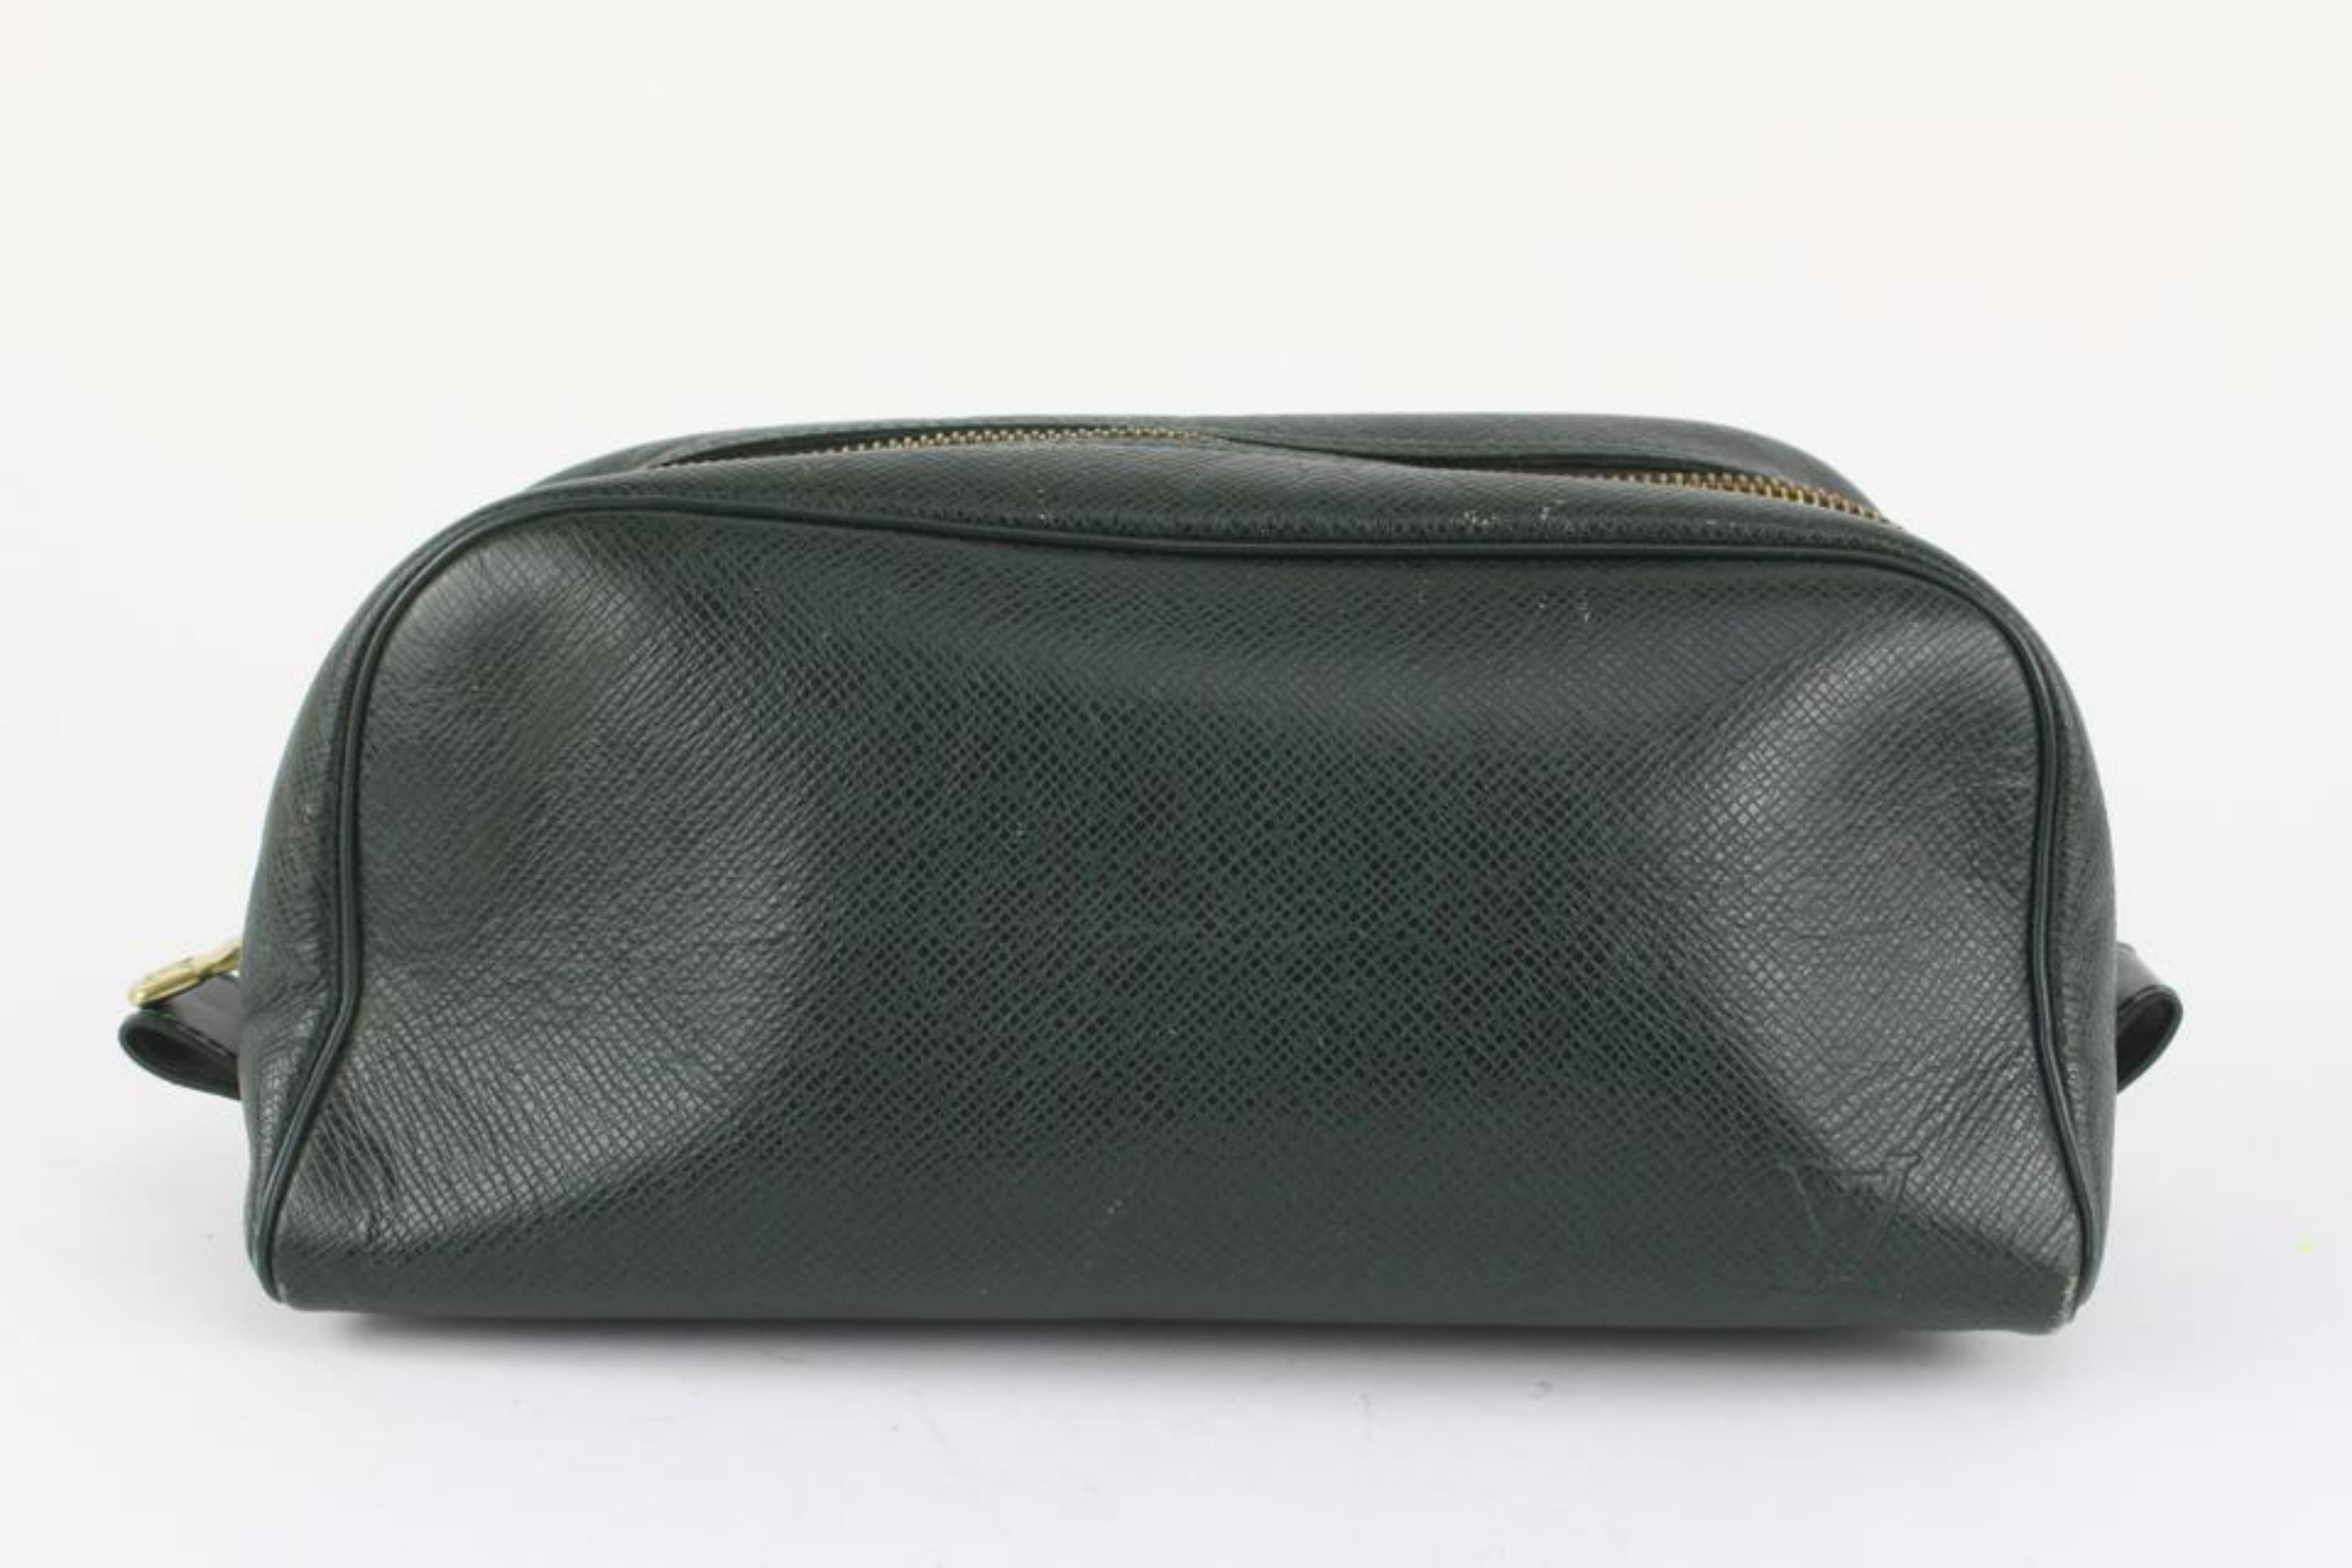 Women's Louis Vuitton Green Taiga Leather Trousse Cosmetic Pouch Toiletry Case 1210lv40